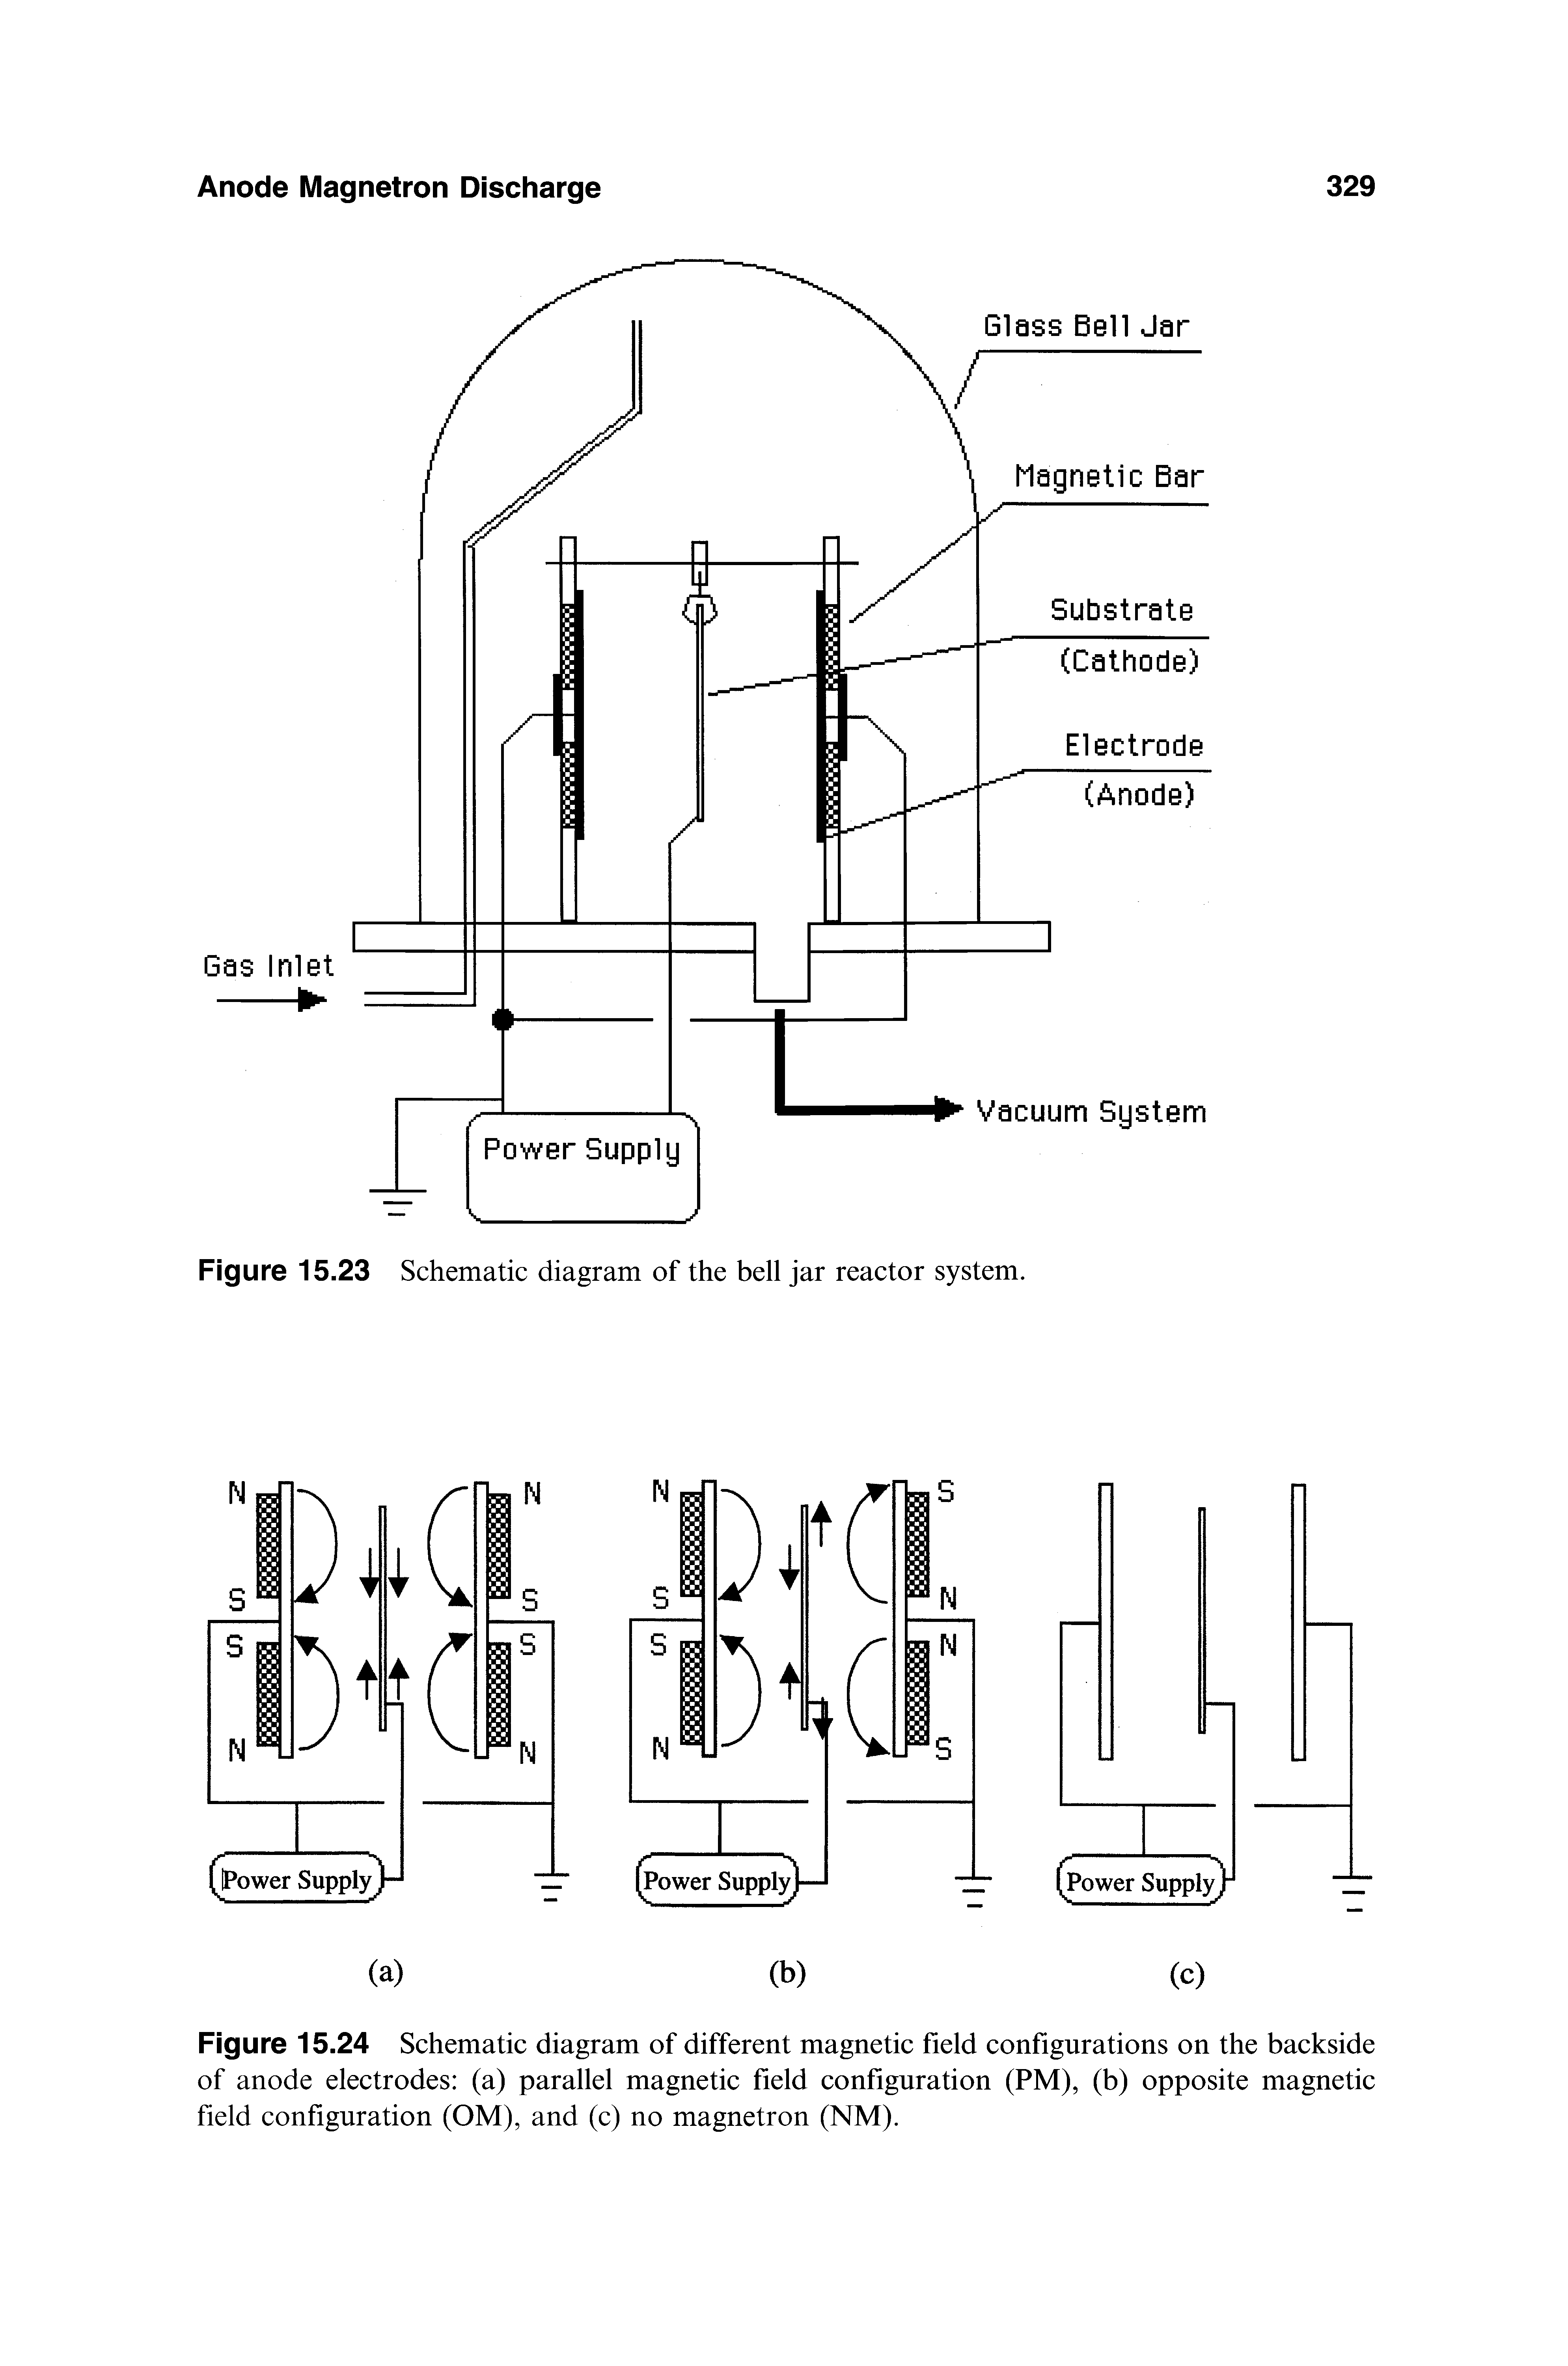 Figure 15.24 Schematic diagram of different magnetic field configurations on the backside of anode electrodes (a) parallel magnetic field configuration (PM), (b) opposite magnetic field configuration (OM), and (c) no magnetron (NM).